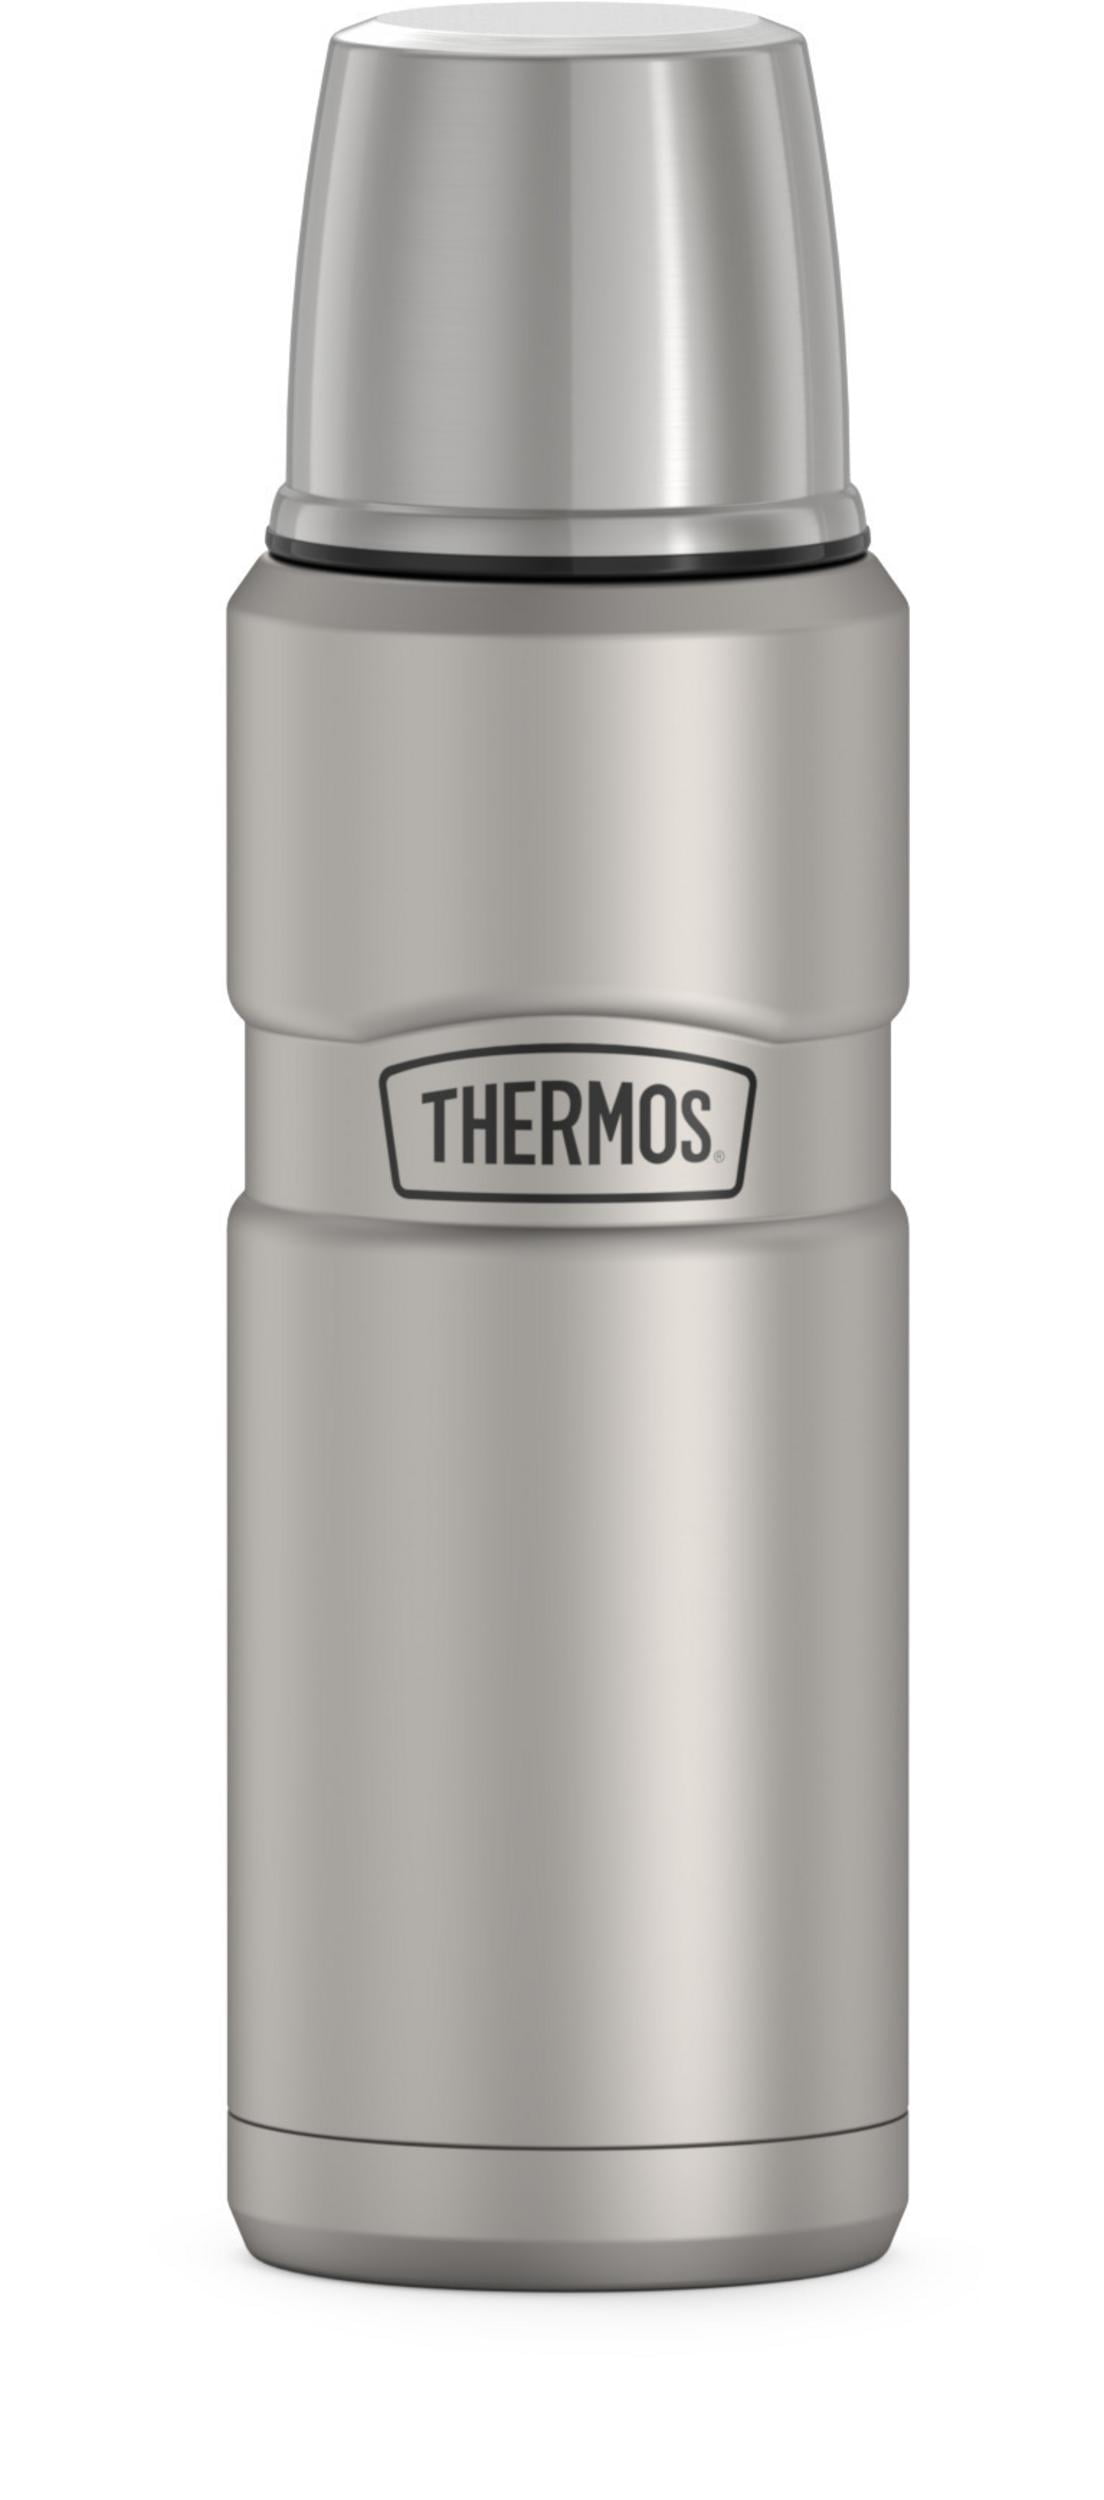 Thermos 16 oz Sipp Vacuum Insulated Stainless Steel Water Bottle 